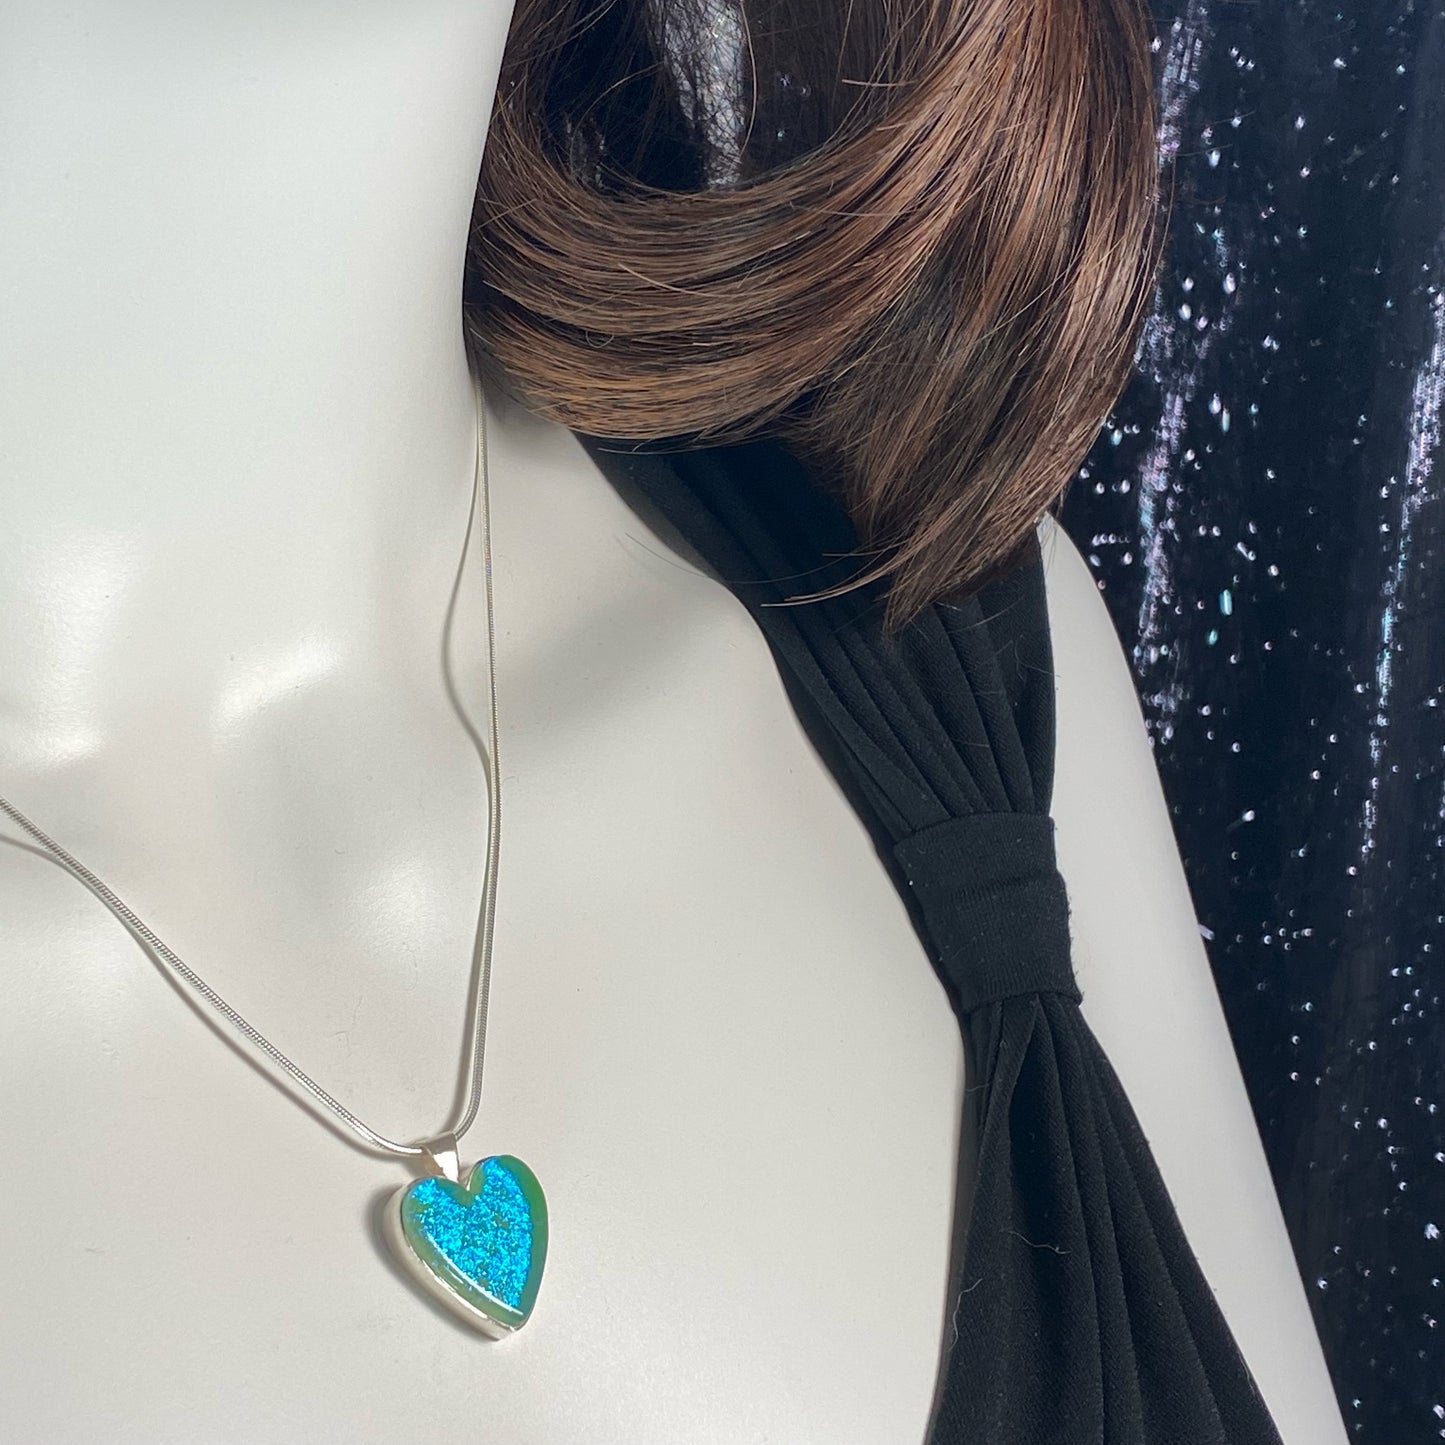 Soft sparkly aqua blue glass heart necklace, fused glass, glass jewelry, glass and silver jewelry, handmade, handcrafted, American Craft, hand fabricated jewelry, hand fabricated jewellery, Athens, Georgia, colorful jewelry, sparkle, bullseye glass, dichroic glass, art jewelry